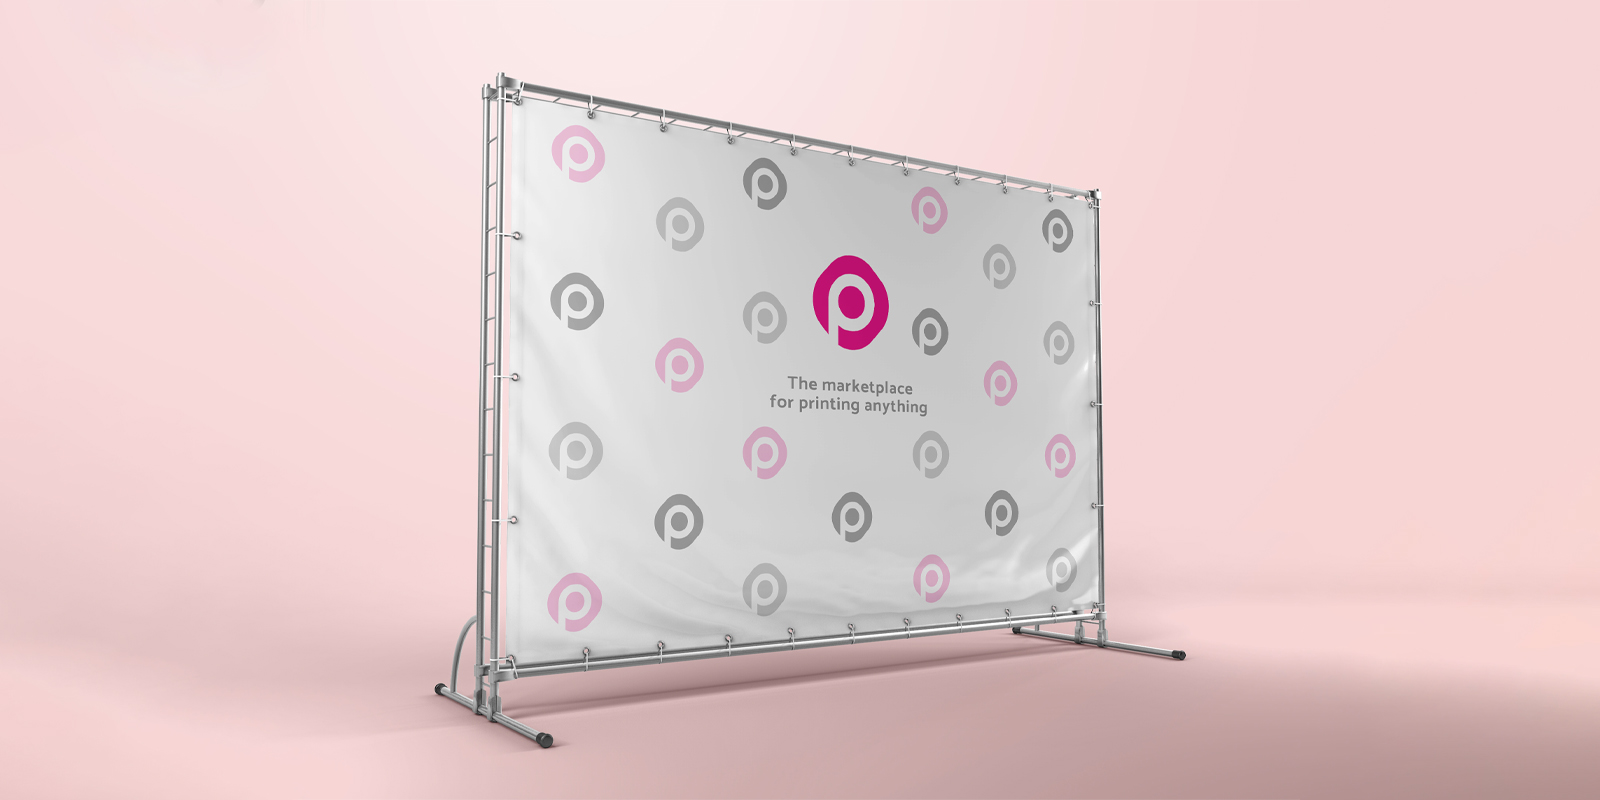 Backdrop banners in Brisbane - Print with Pagerr